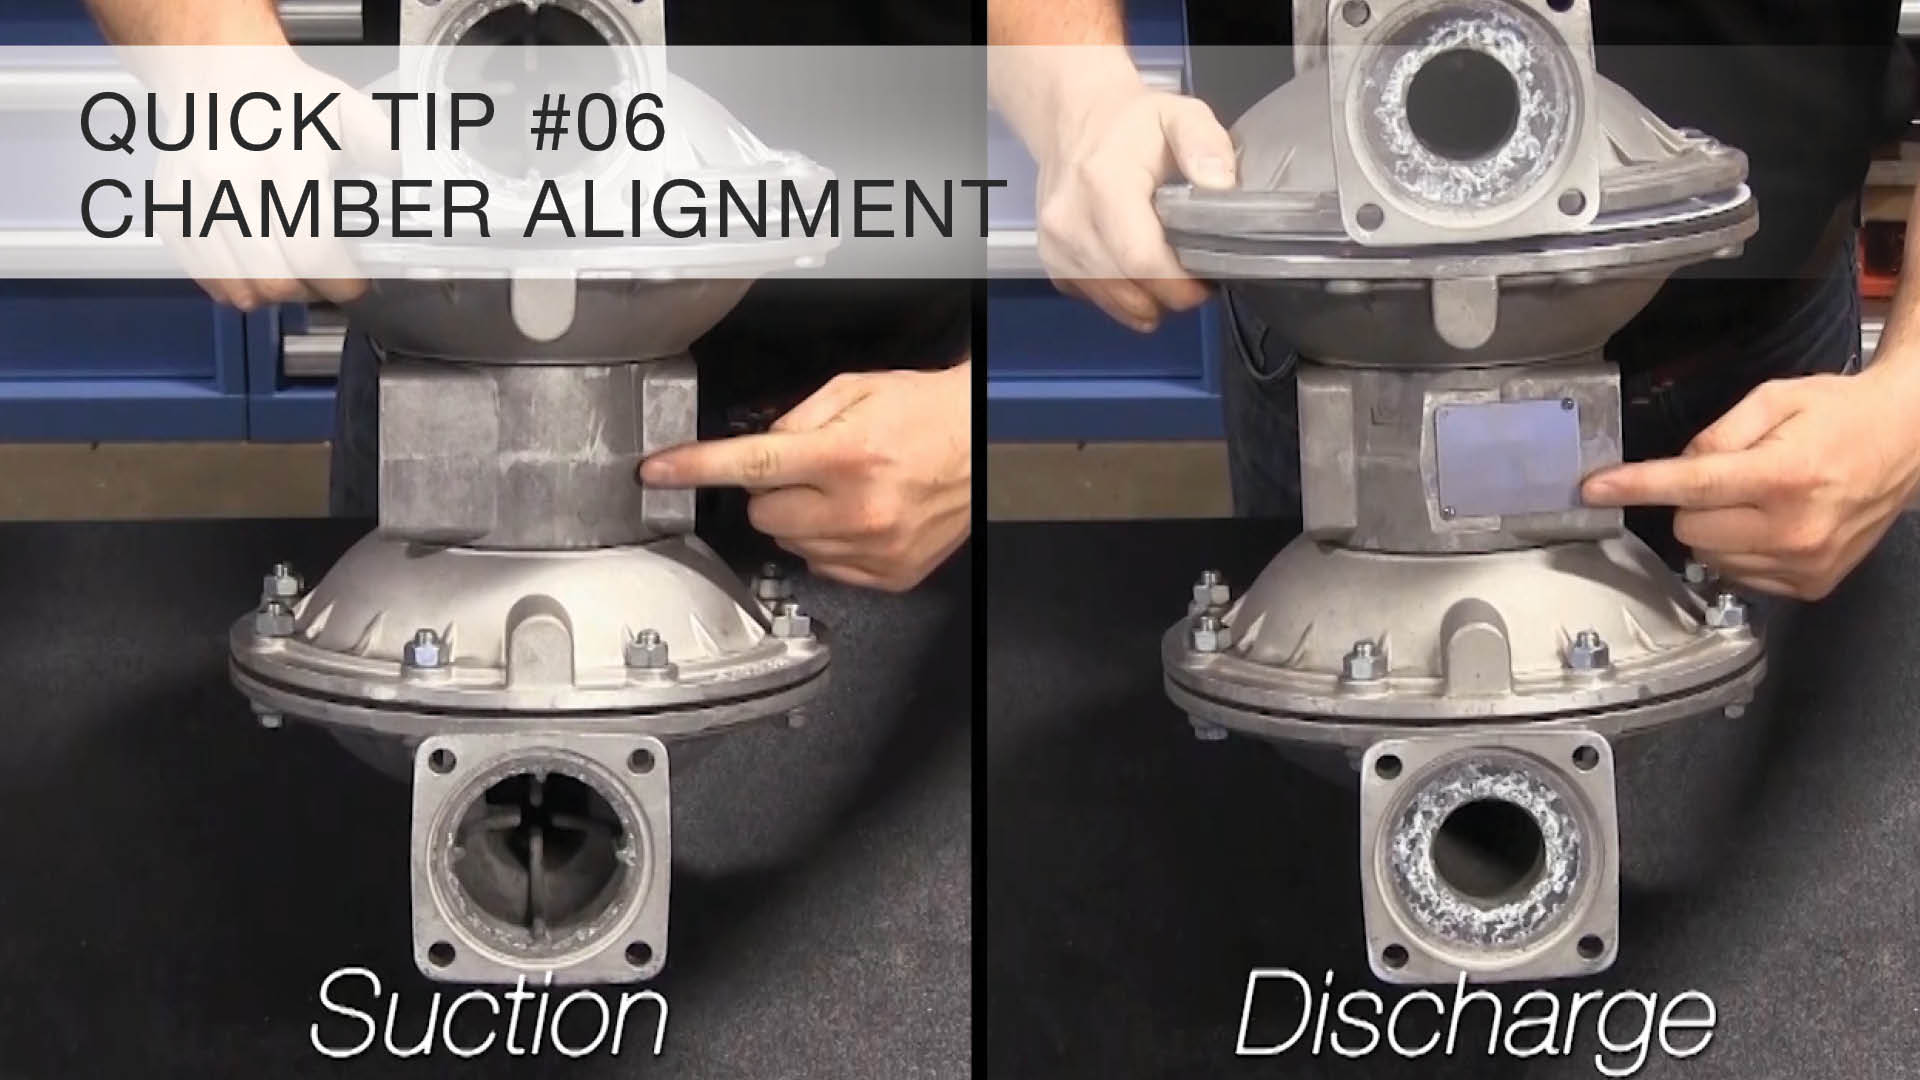 Quick Tip #06 - Chamber Alignment